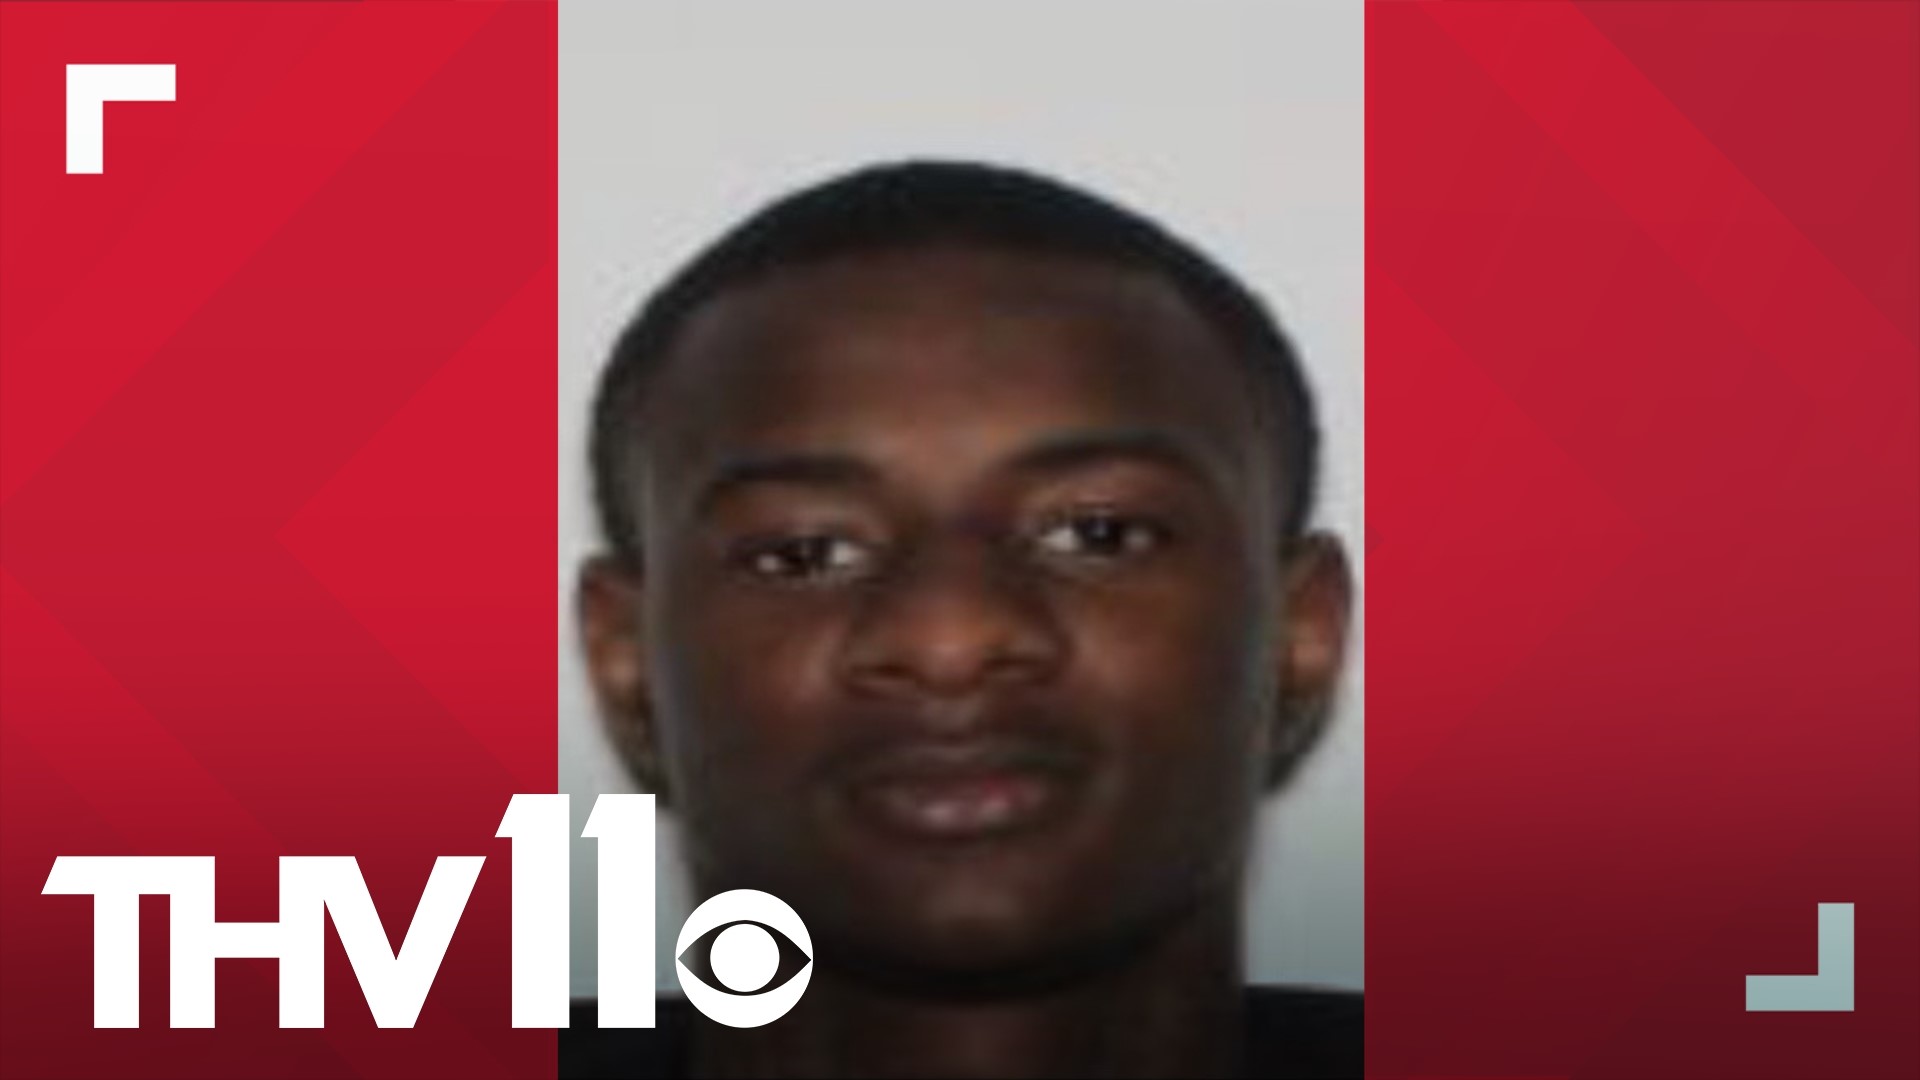 Little Rock police have issued a warrant for capital murder for Darious Alford in connection with a homicide that occurred Sunday, May 6 on West Roosevelt Road.